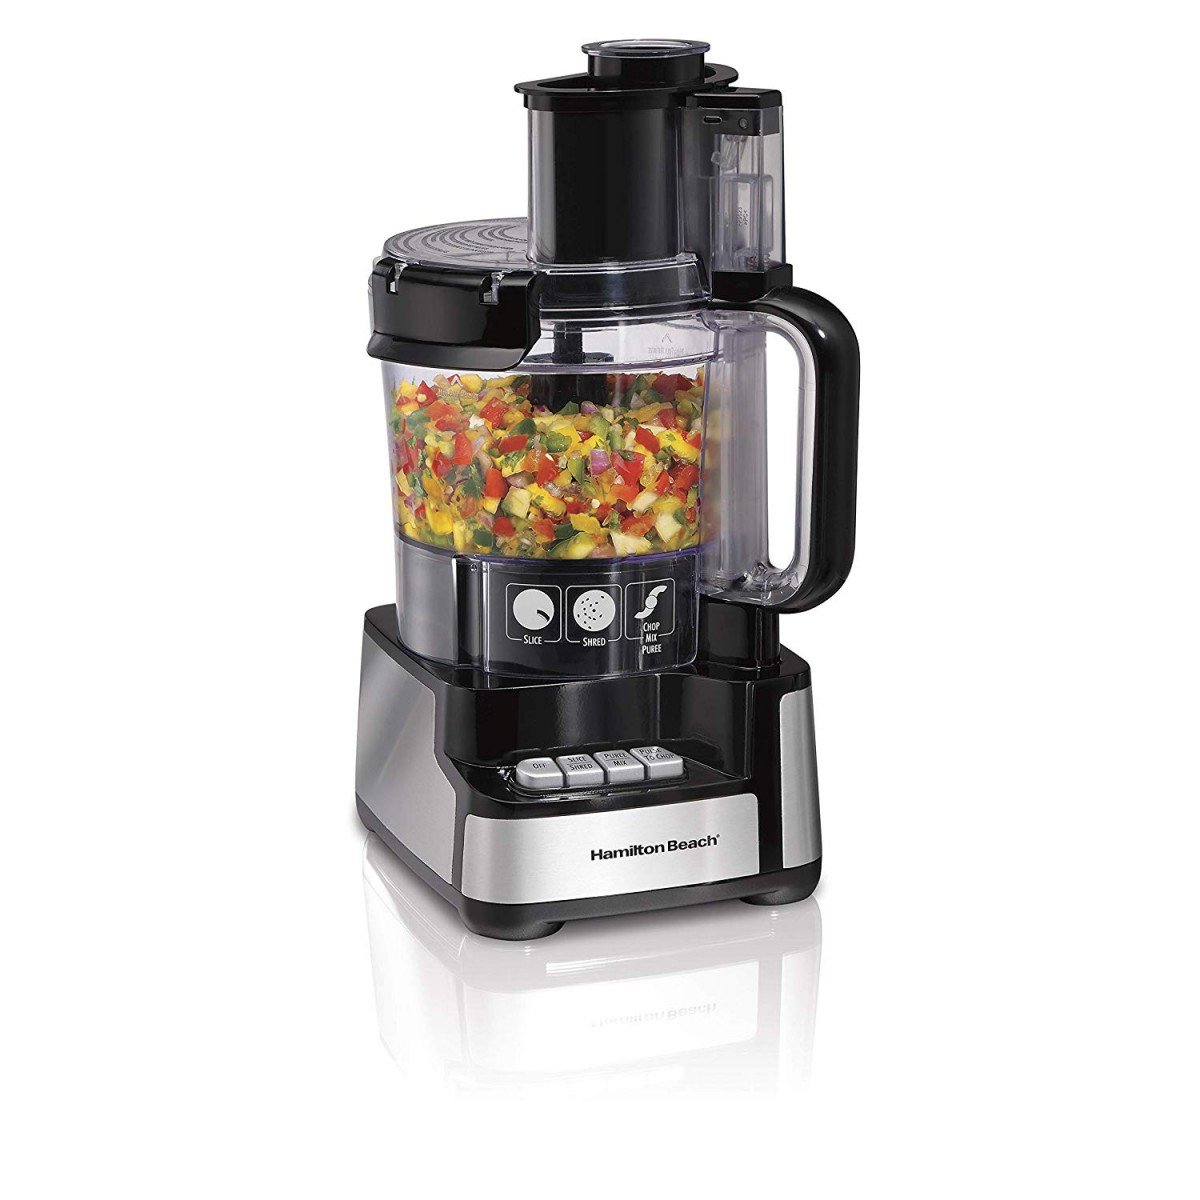 Hamilton Beach 70725 12-Cup Stack & Snap Review